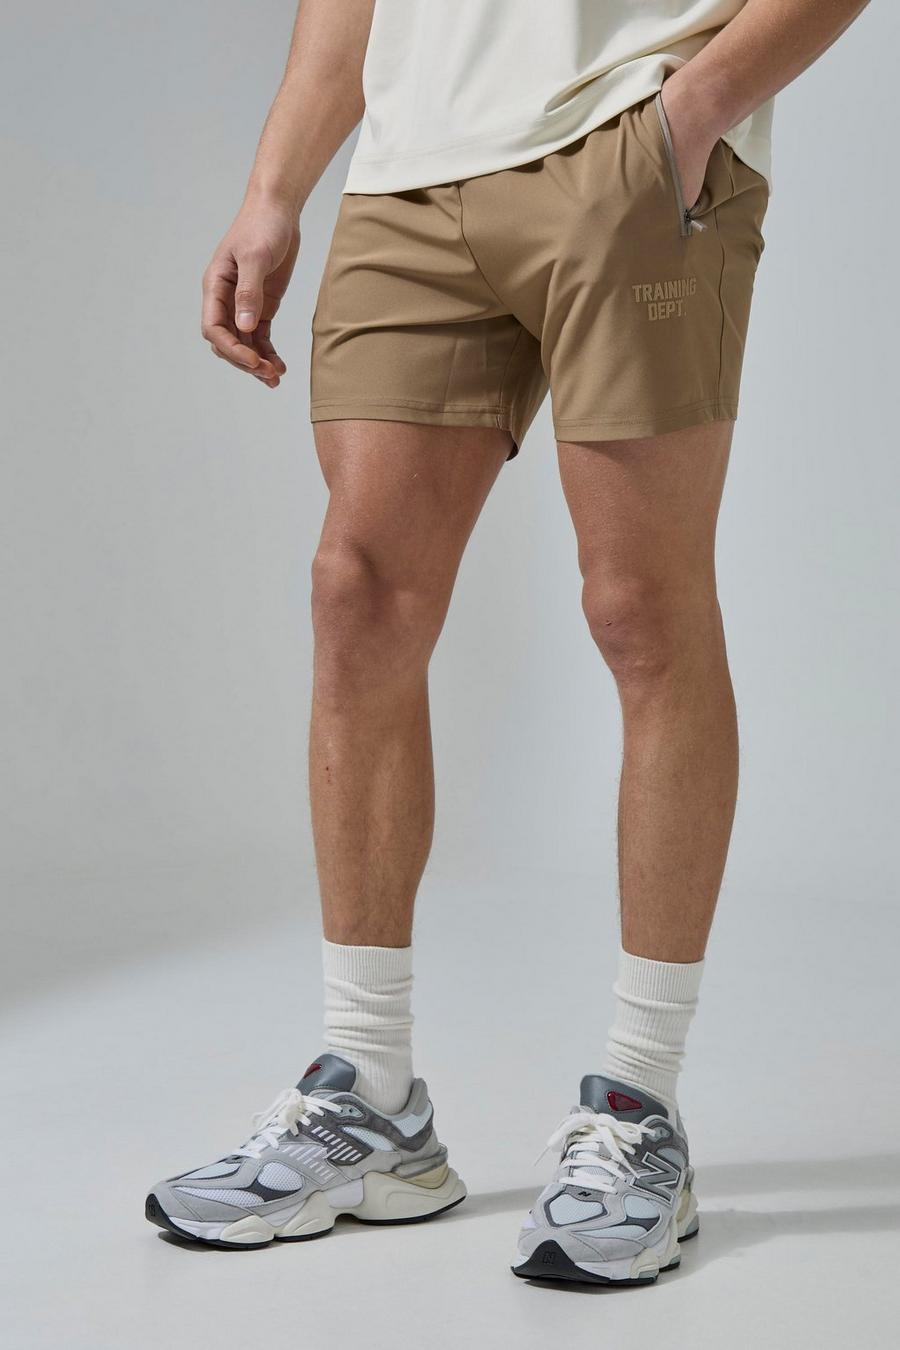 Active Training Dept 5 Inch Shorts, Brown image number 1